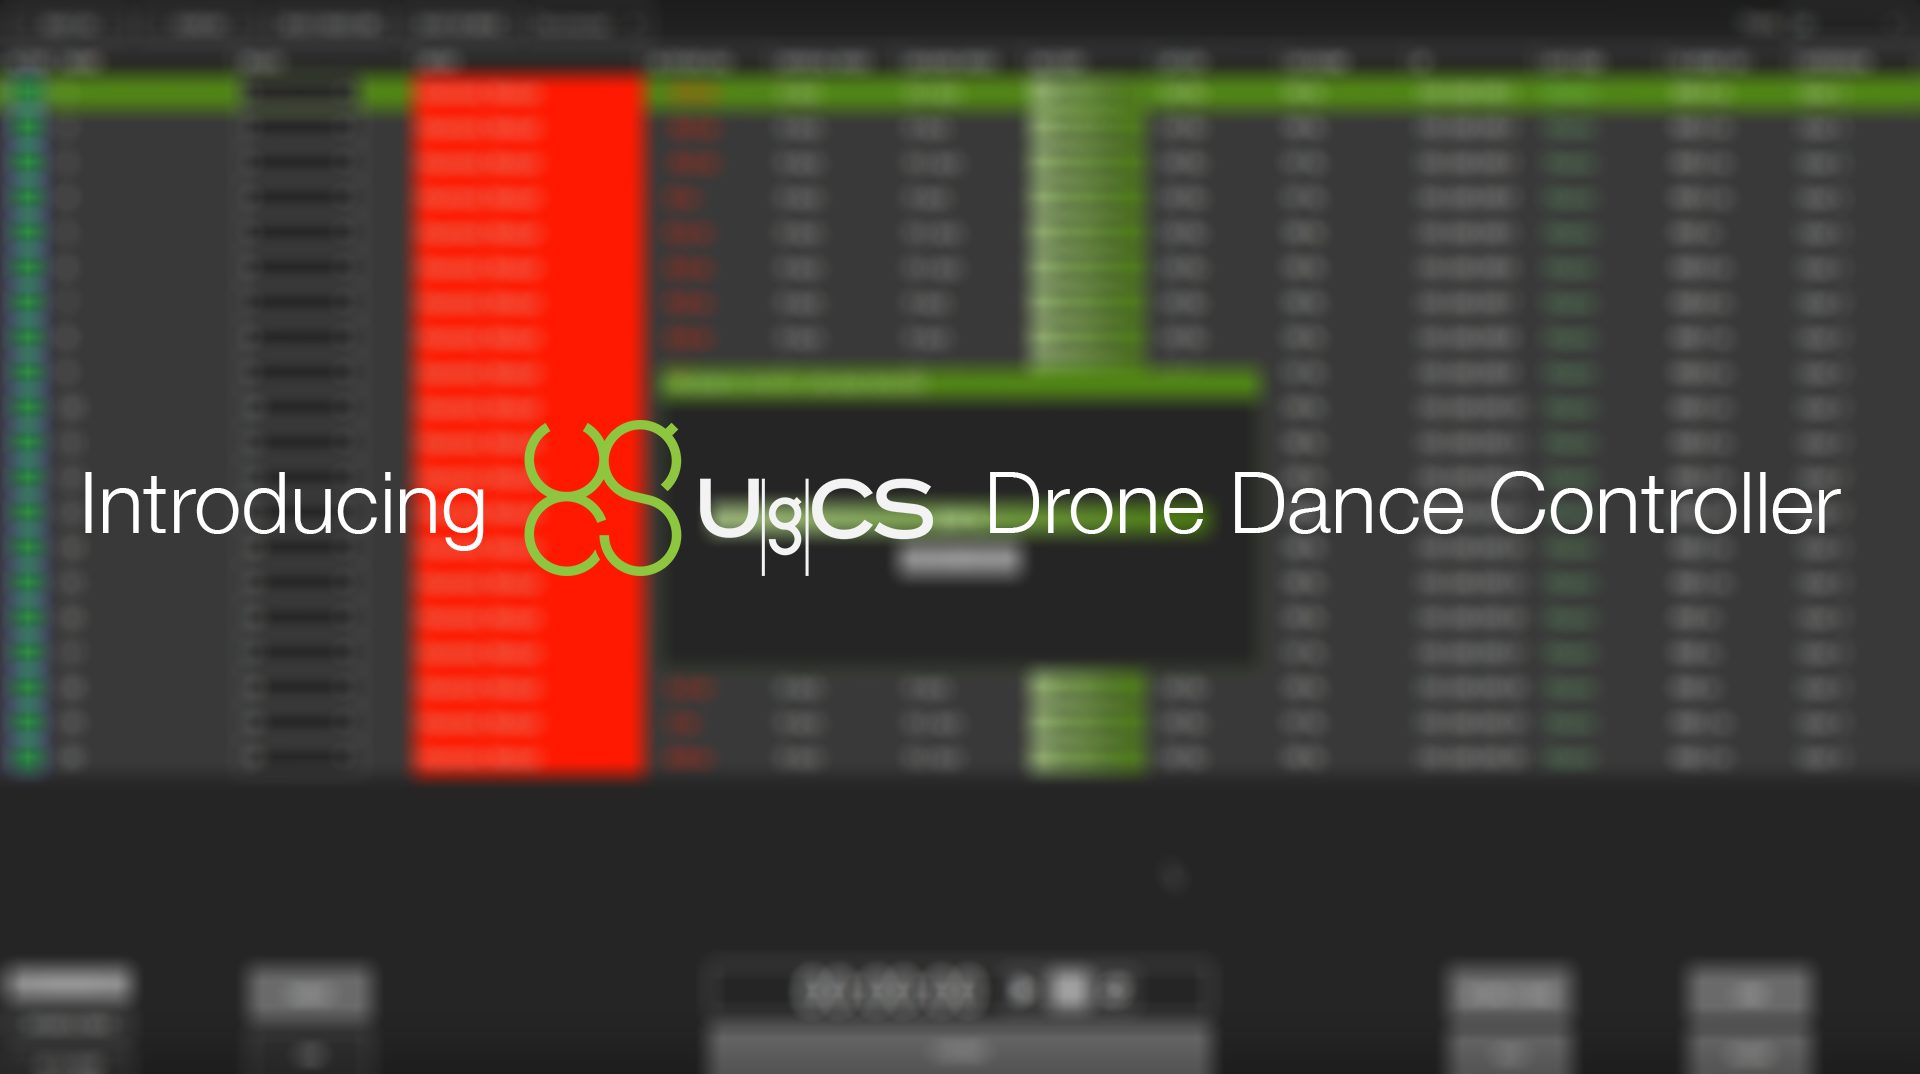 SPH Engineering unveils an addition to UgCS family – UgCS Drone Dance Controller